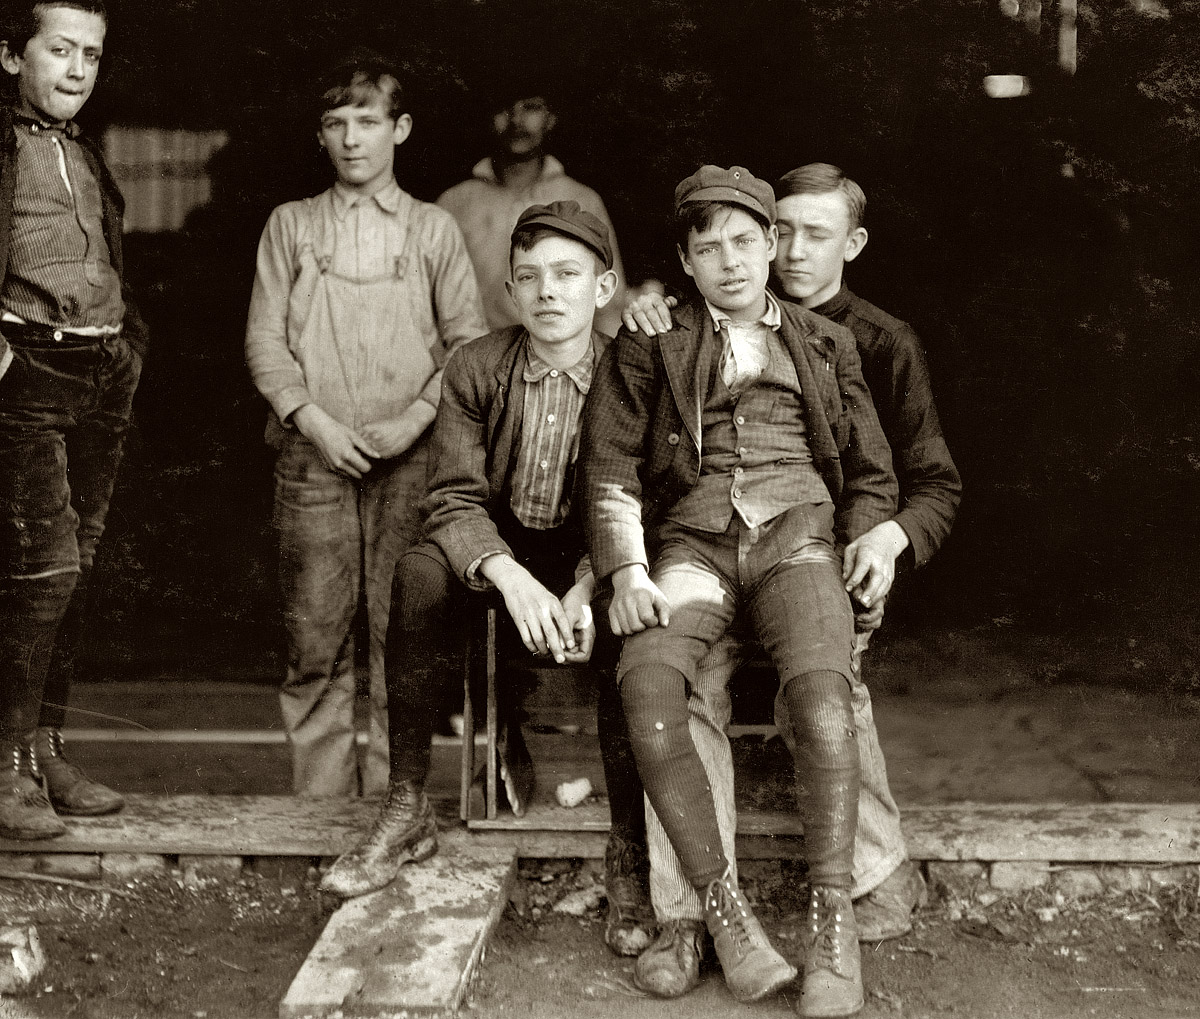 November 1909. "Woodbury Bottle Works. Woodbury, New Jersey. Noon hour. All are workers." View full size. Photograph by Lewis Wickes Hine.